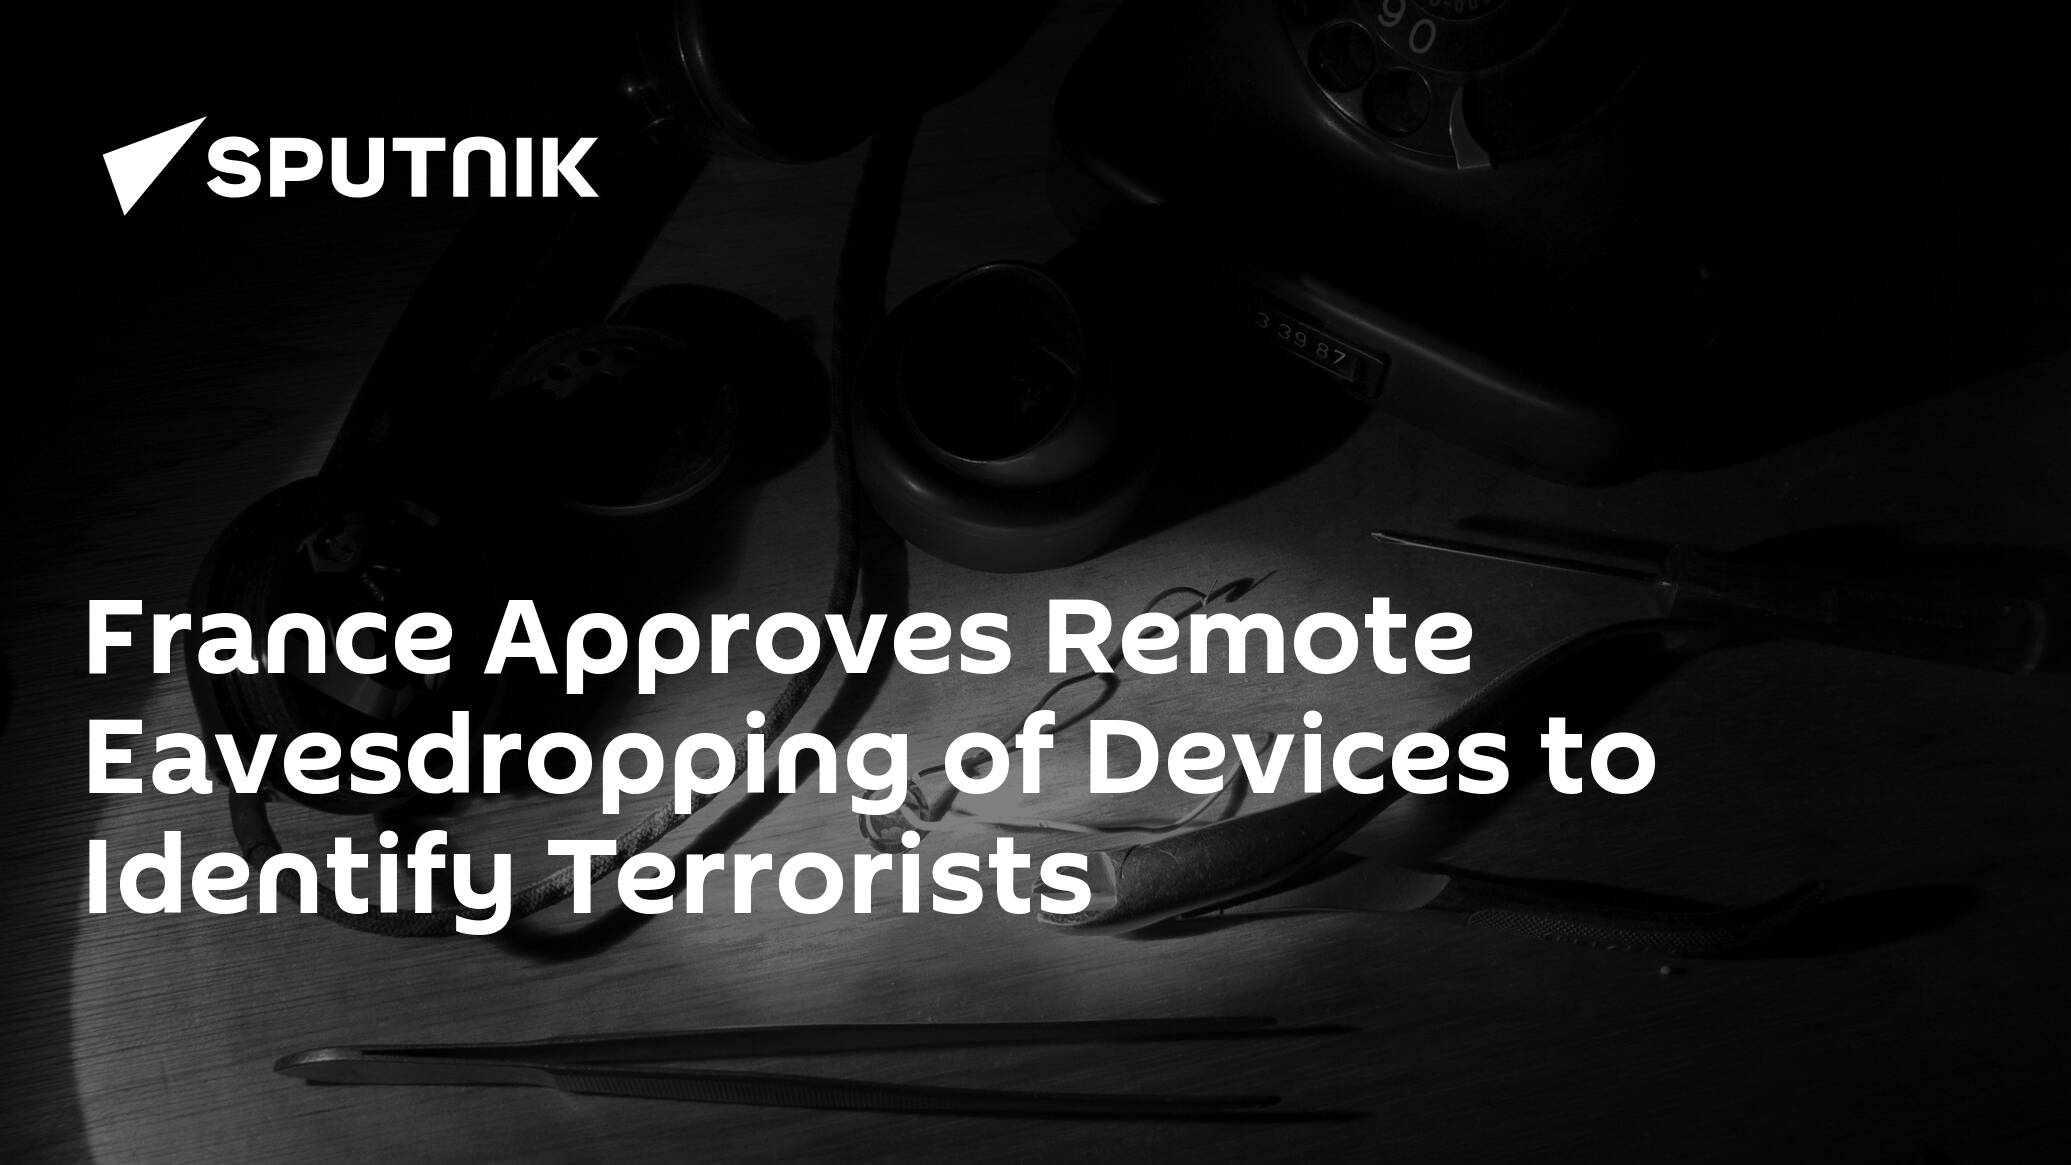 France Approves Remote Eavesdropping of Devices to Identify Terrorists